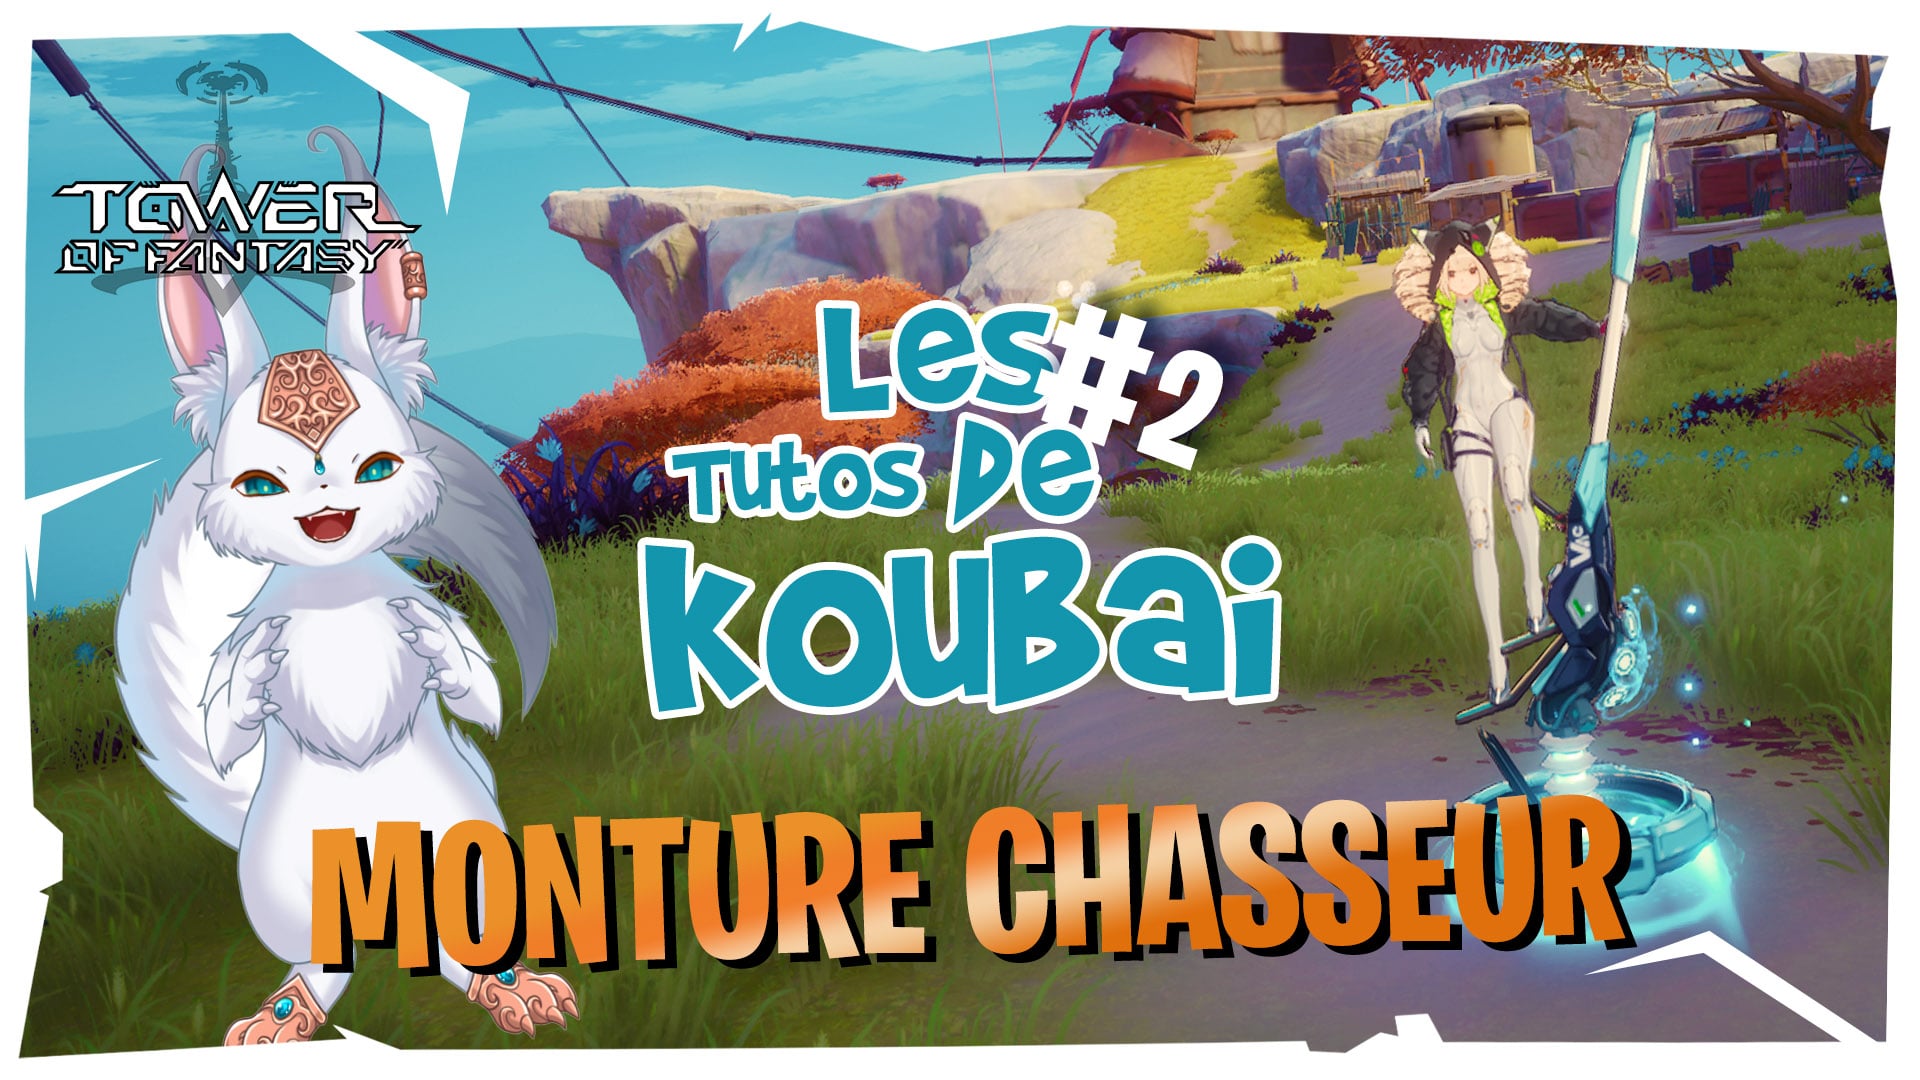 Monture Chasseur | Tower of Fantasy